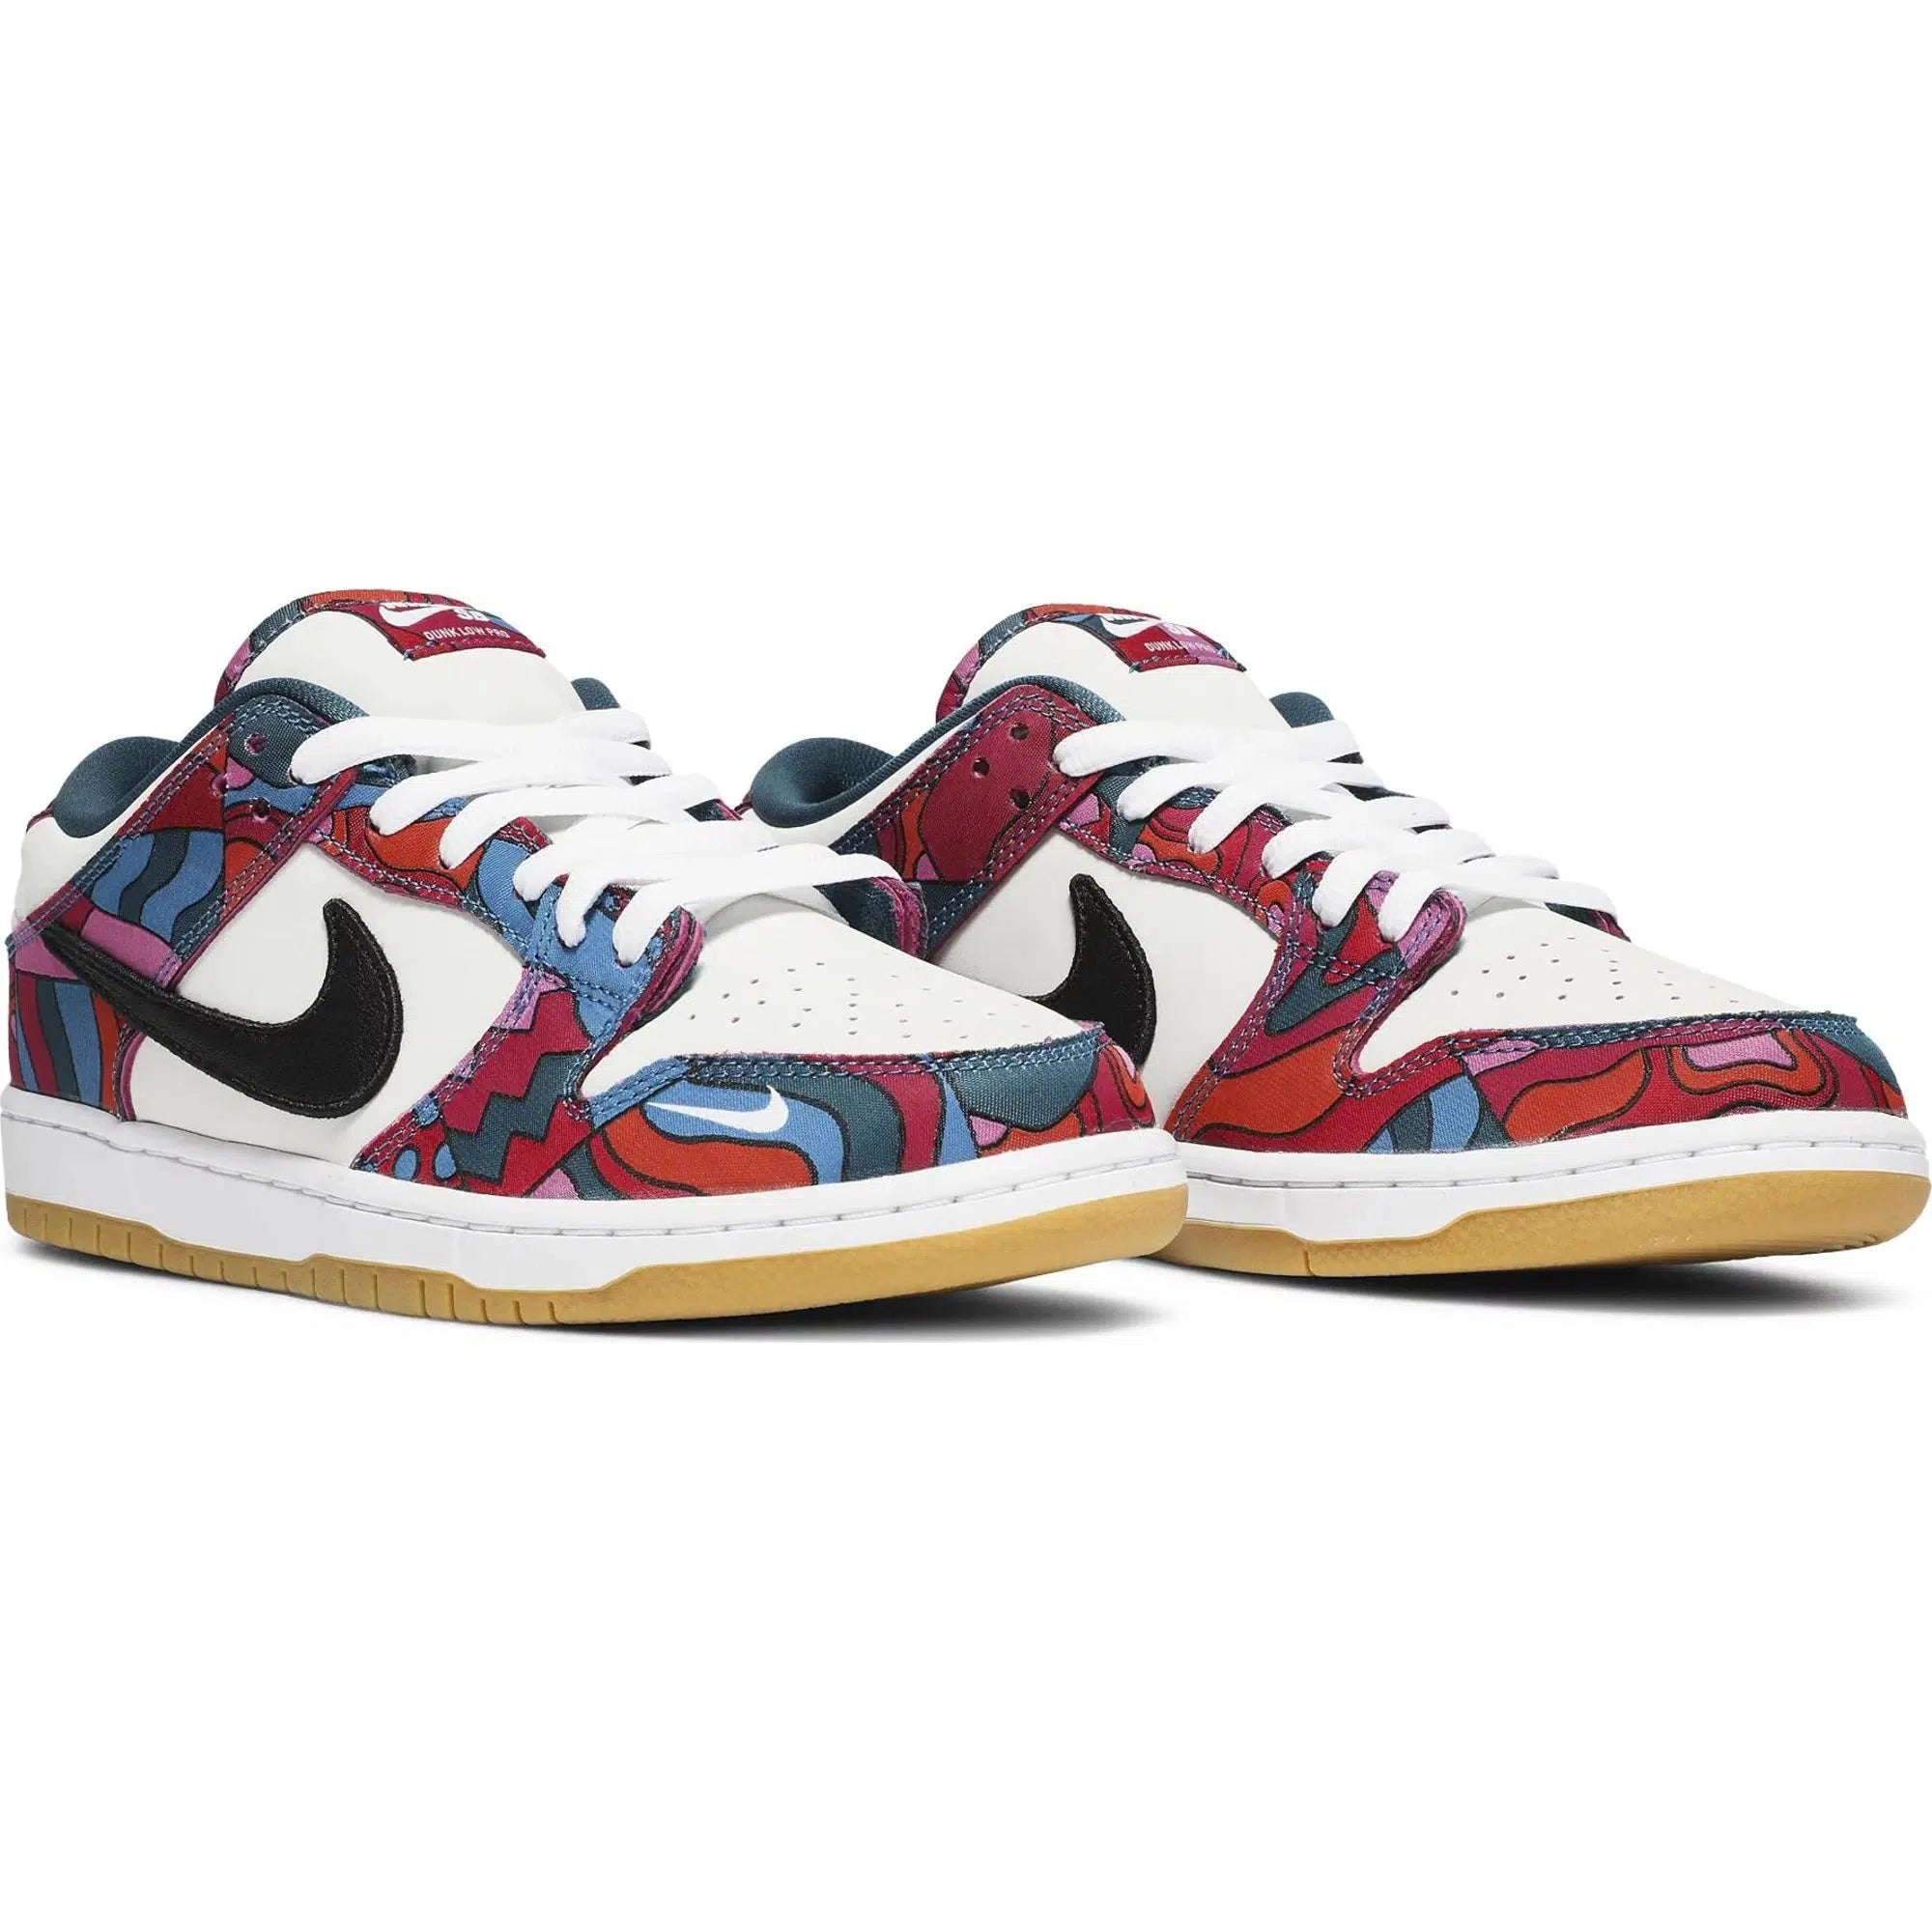 Nike x Parra SB Parra Dunk Low Pro Abstract Art Low Top Sneakers - Sneak in  Peace